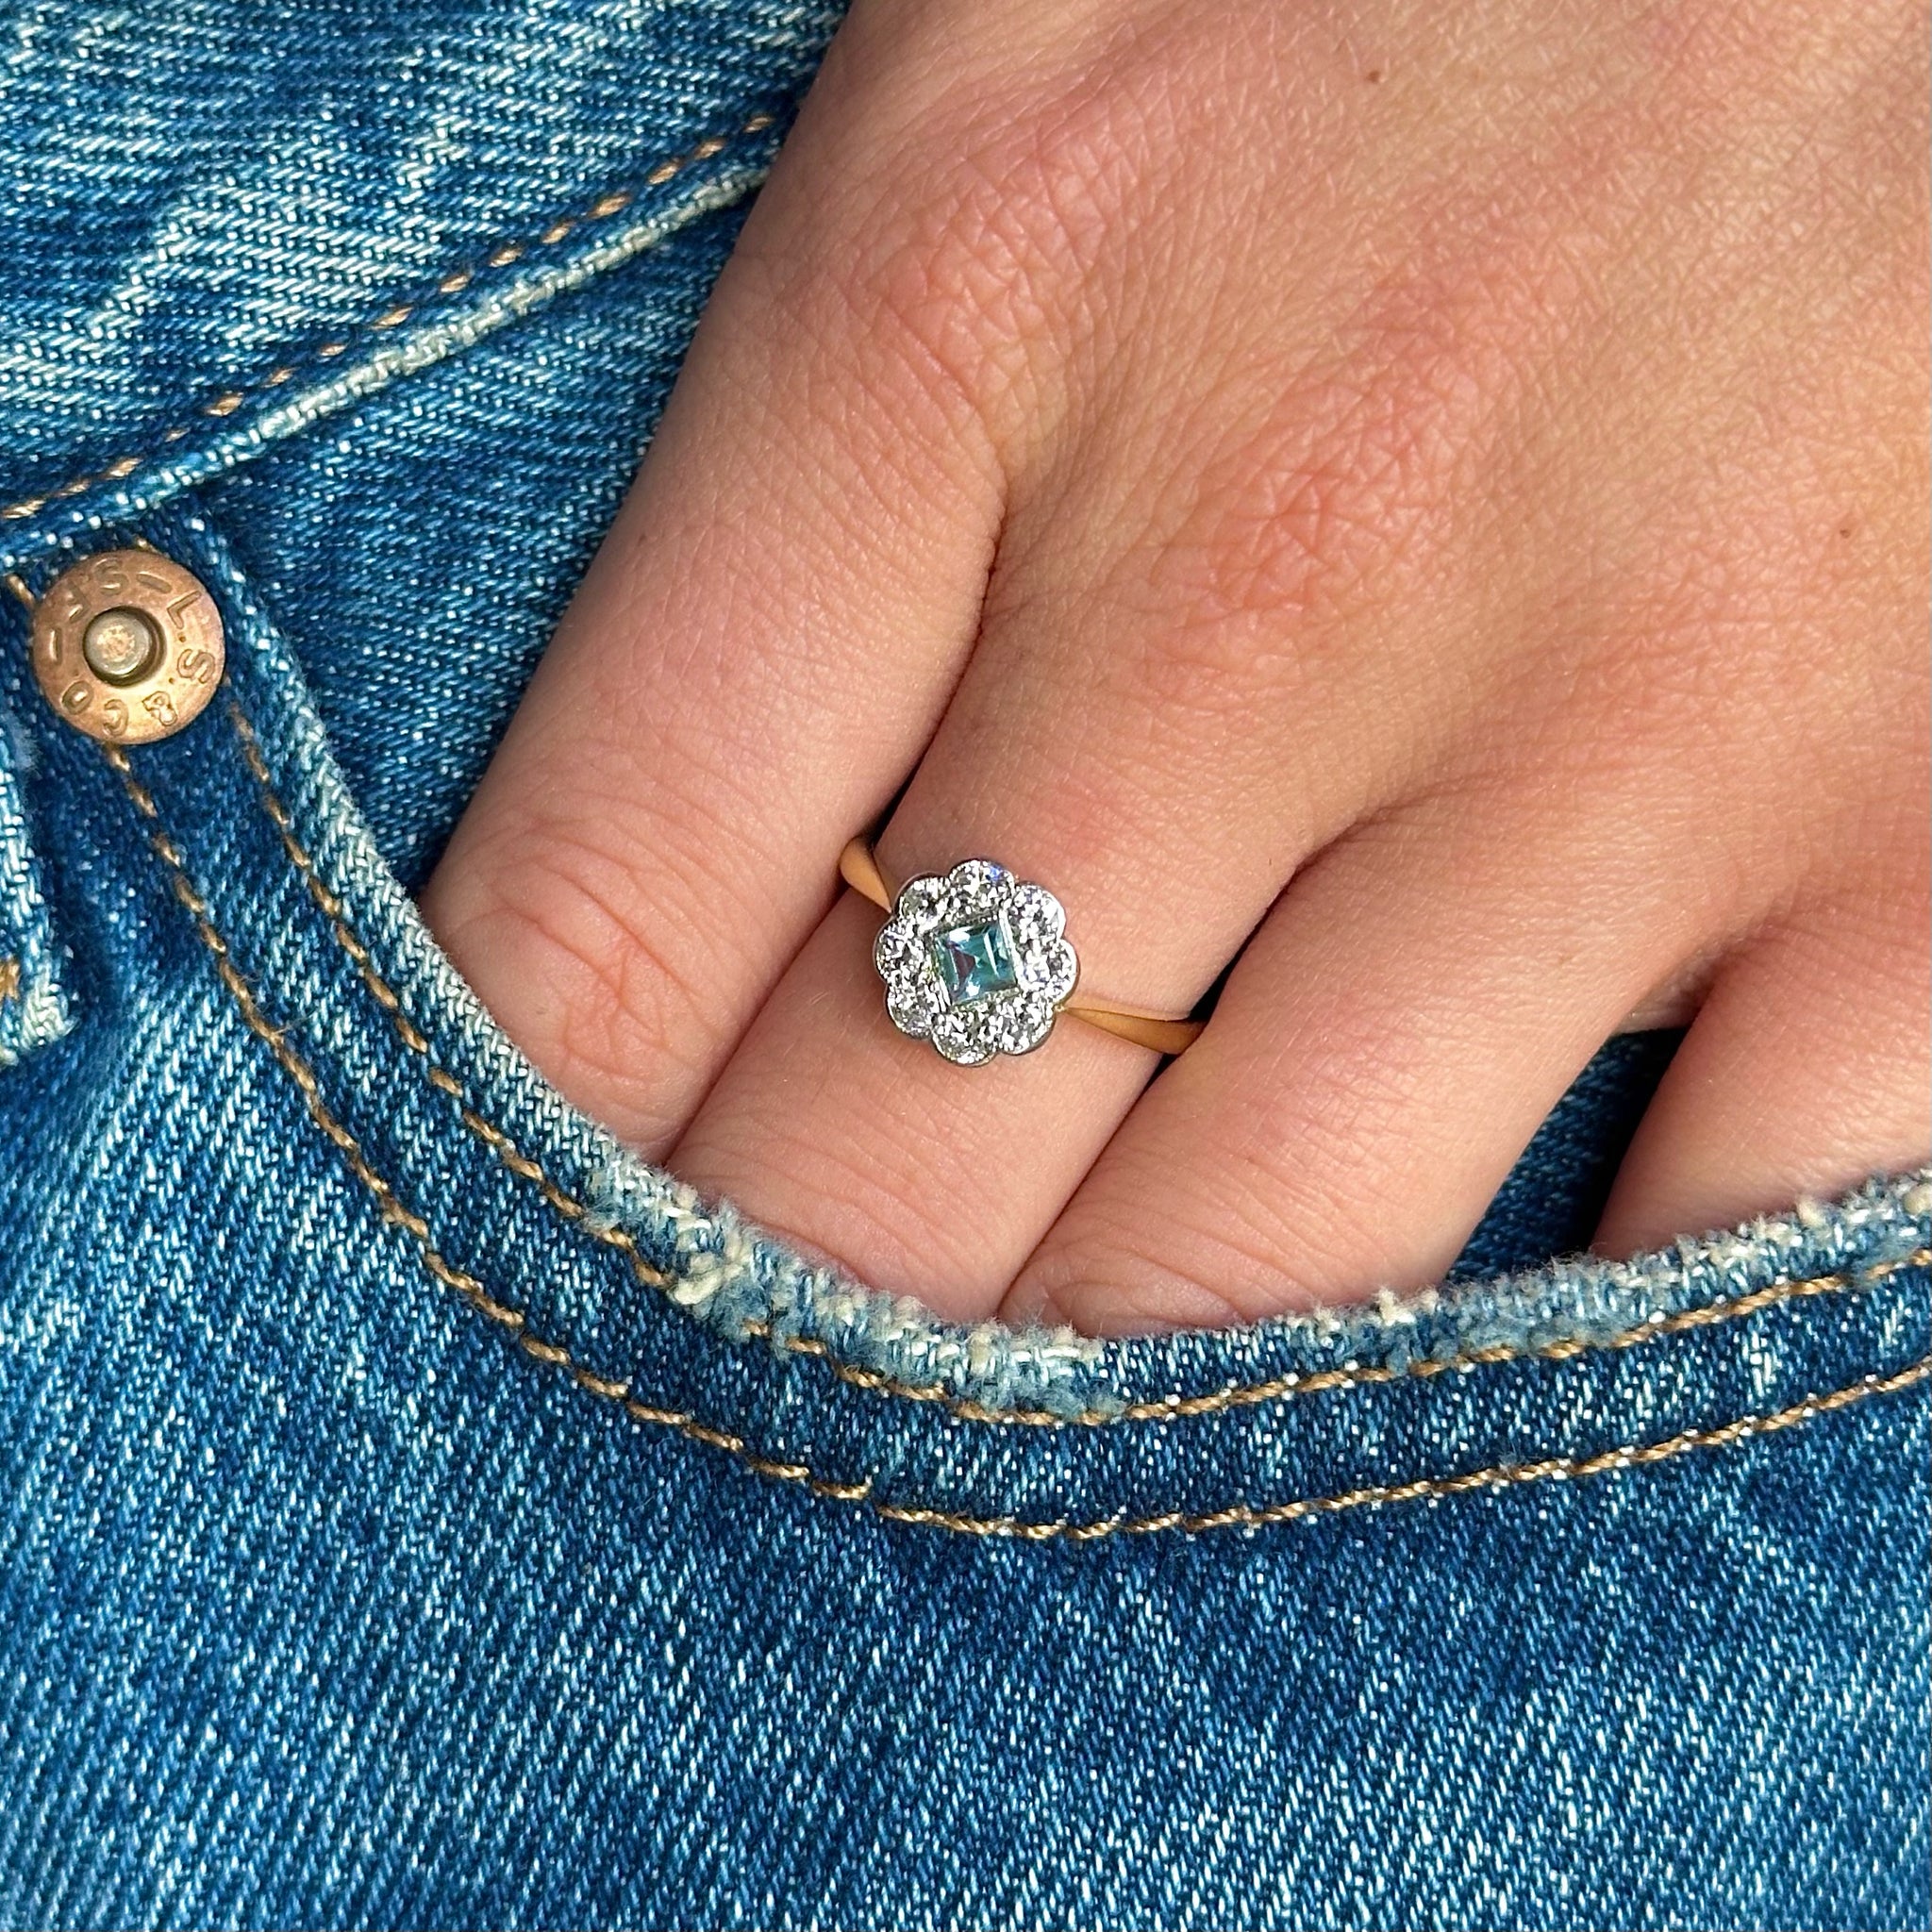 Edwardian aquamarine and diamond ring worn on hand in pocket of jeans